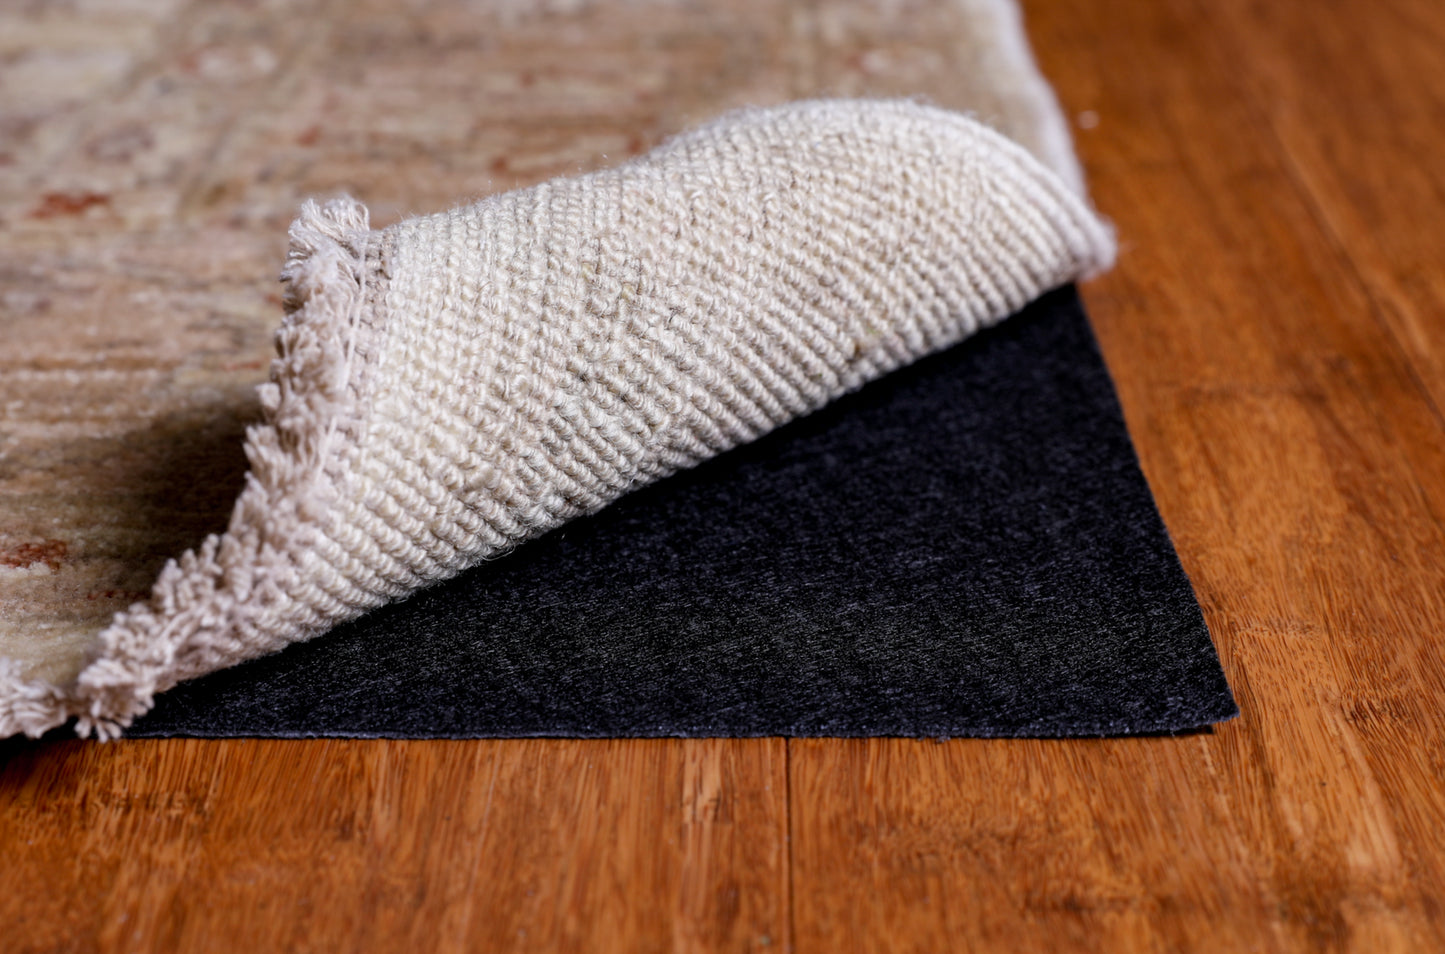 10 Best Rug Pad Options To Avoid Slips and Falls